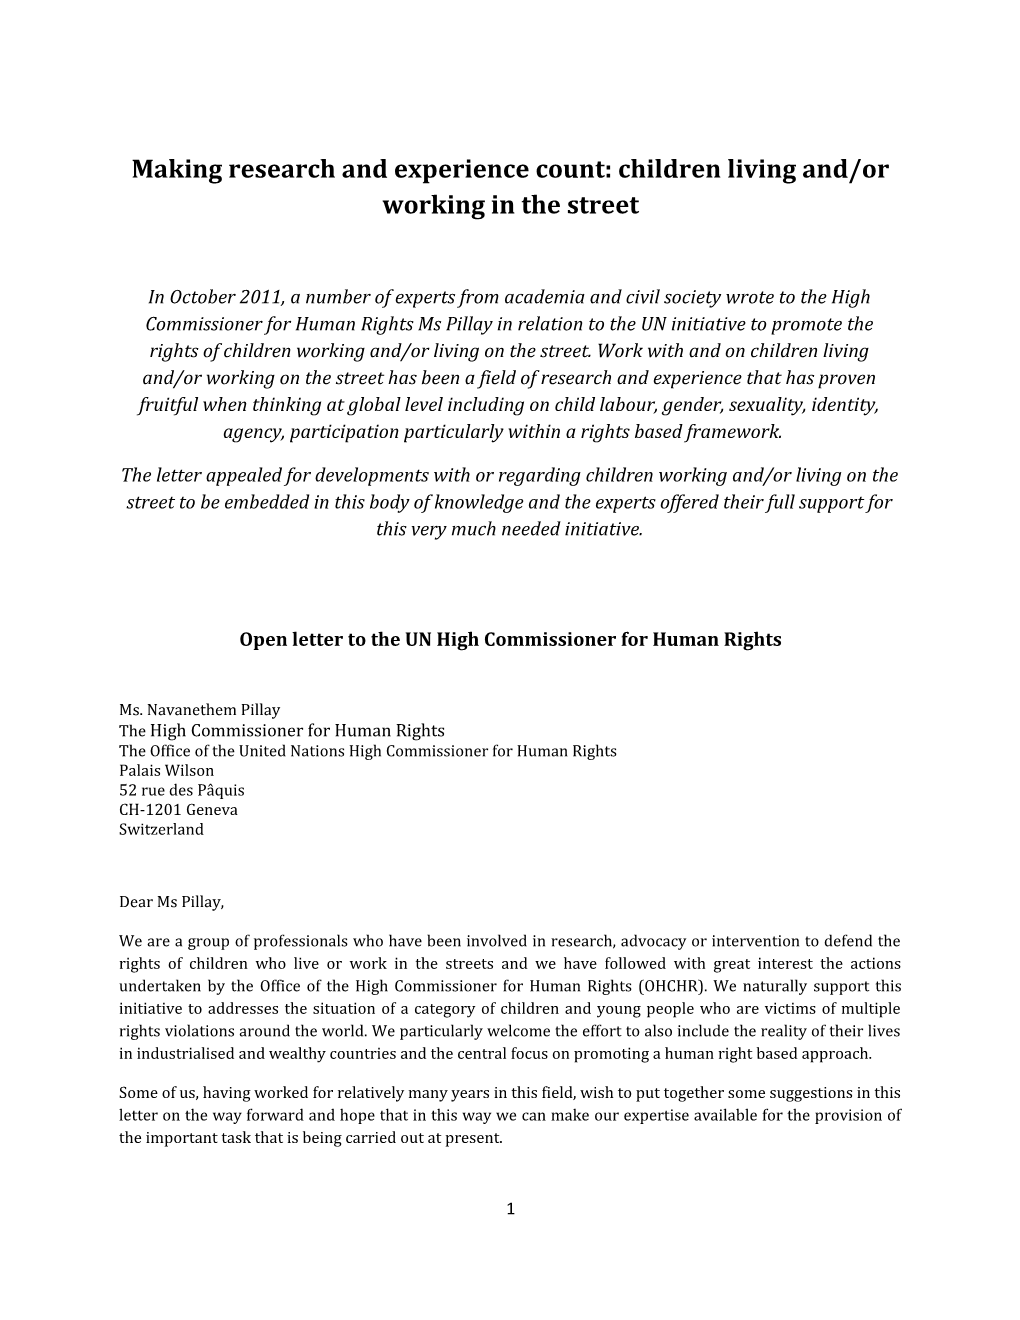 Making Research and Experience Count: Children Living And/Or Working in the Street